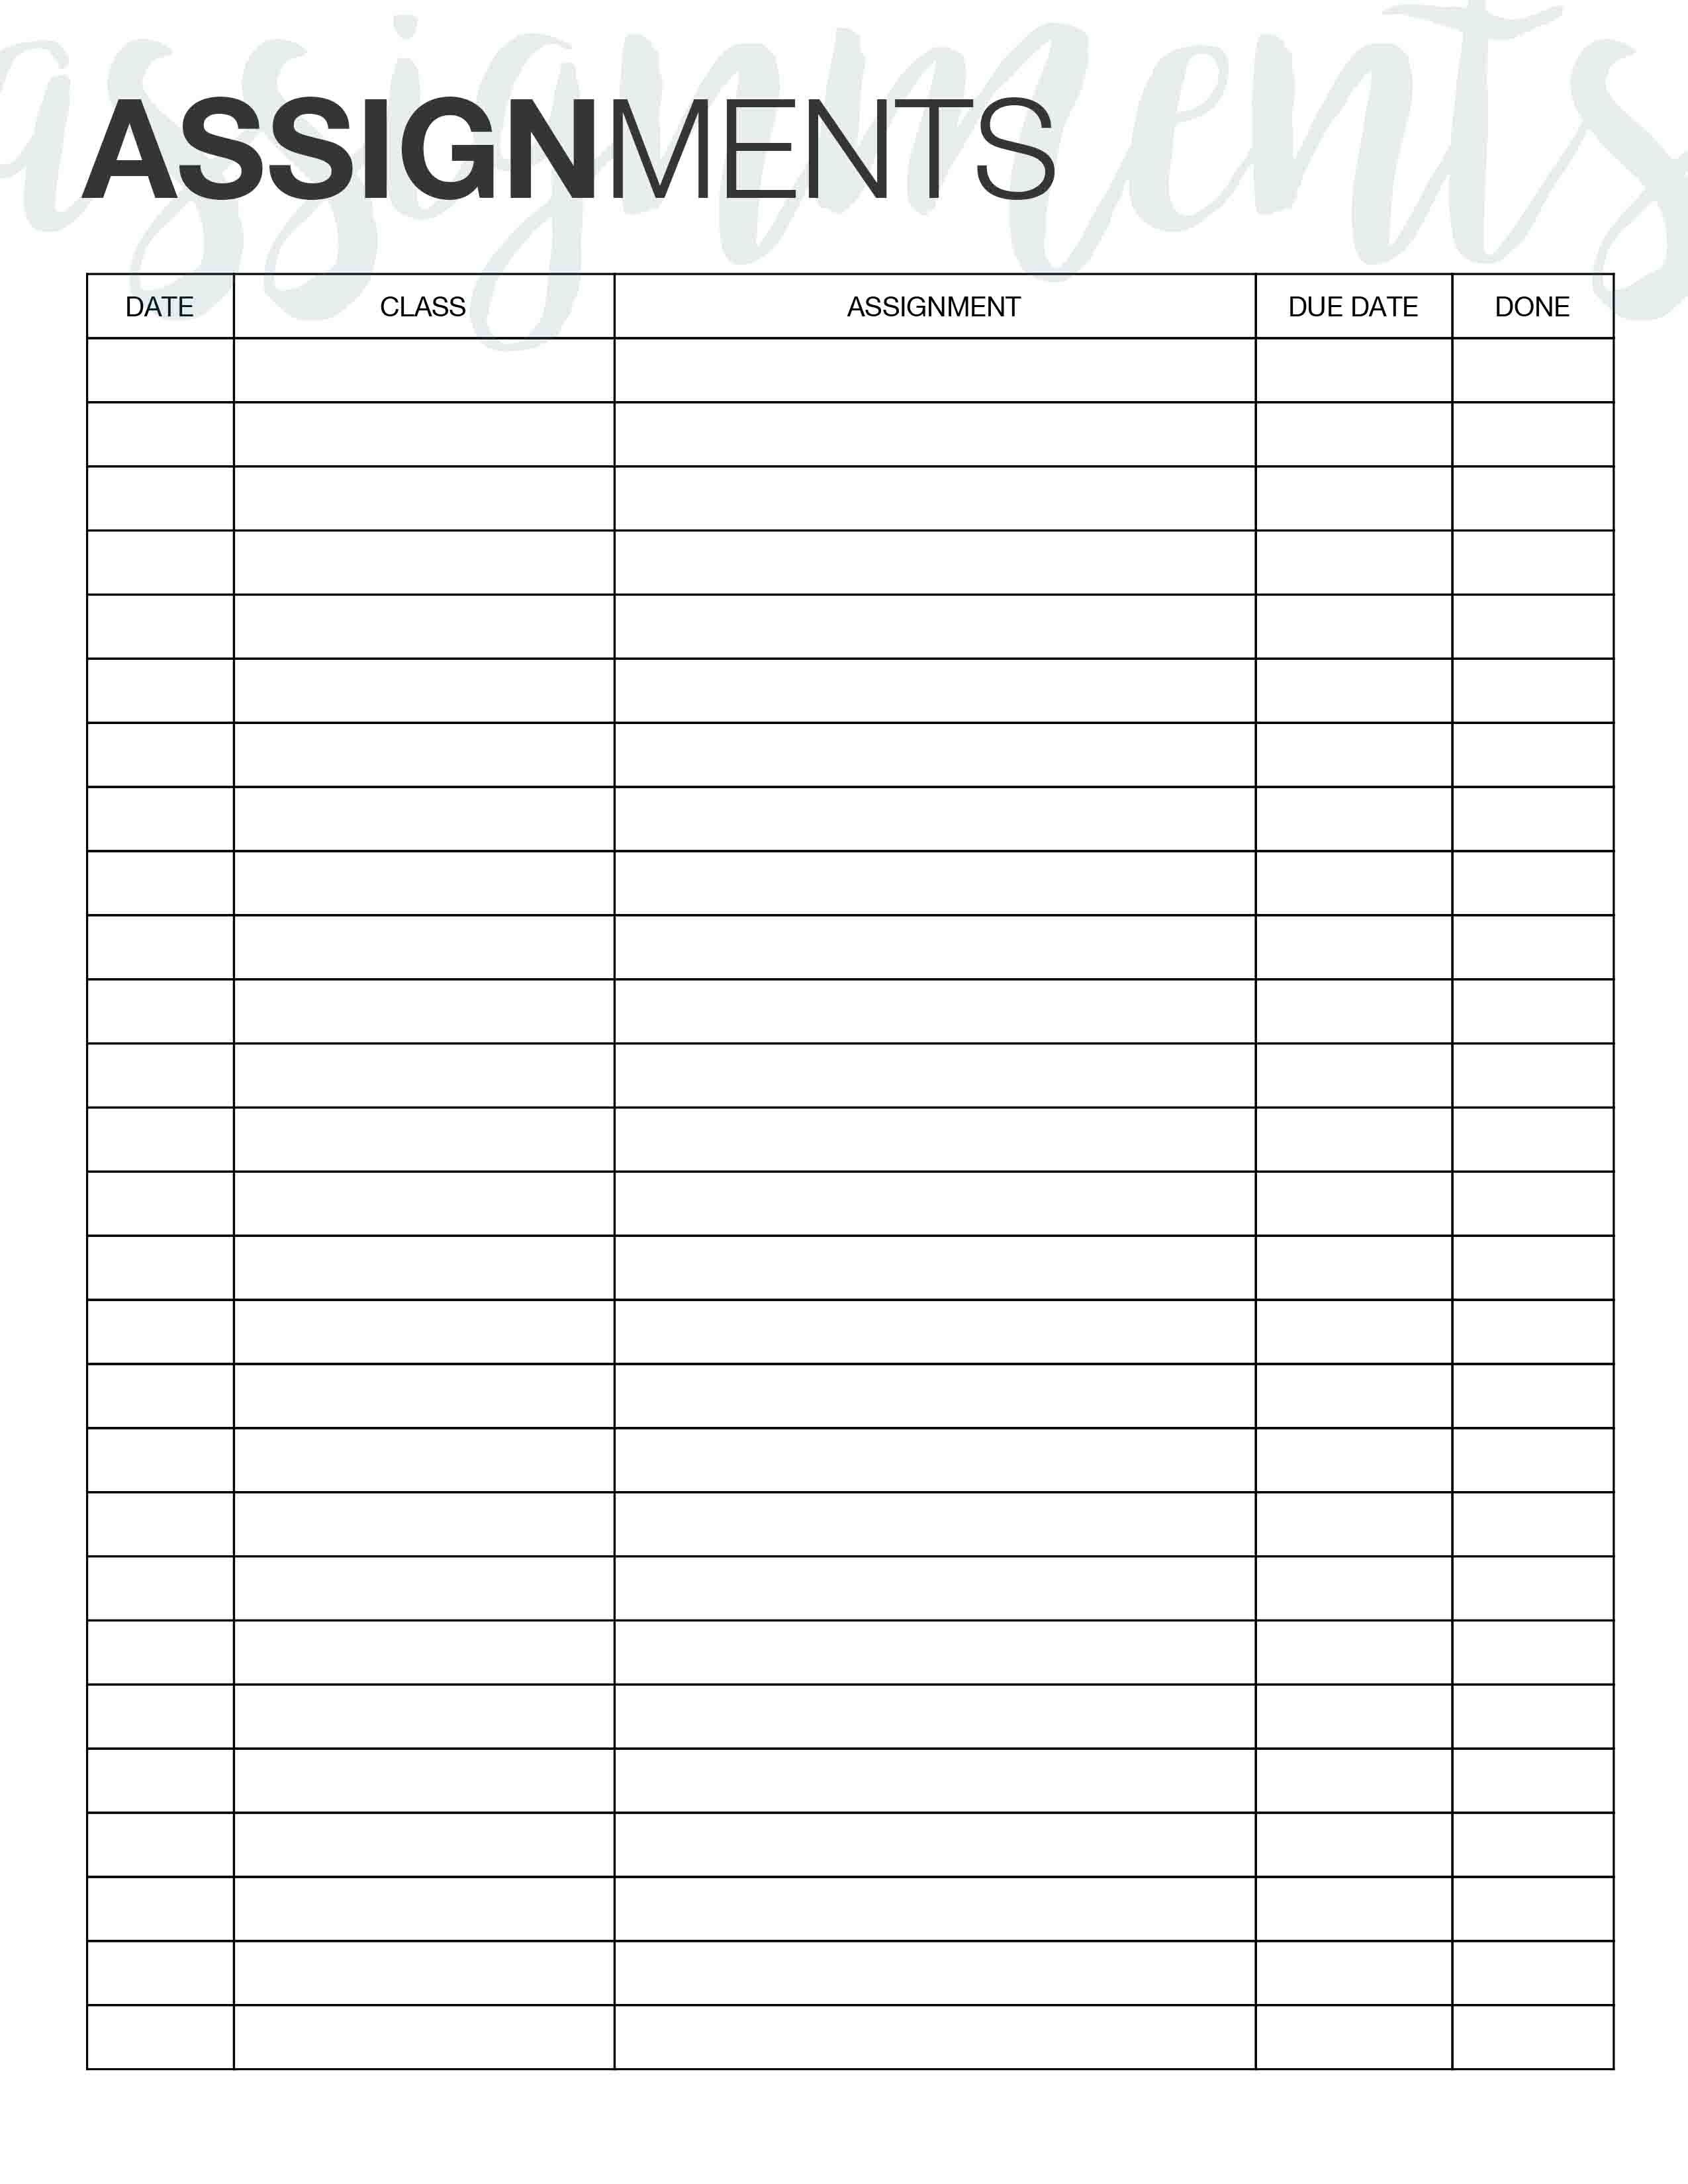 Assignment Tracker. Here&amp;#039;s A Simple Free Printable That You Can Use - Free Printable Daily Assignment Sheets